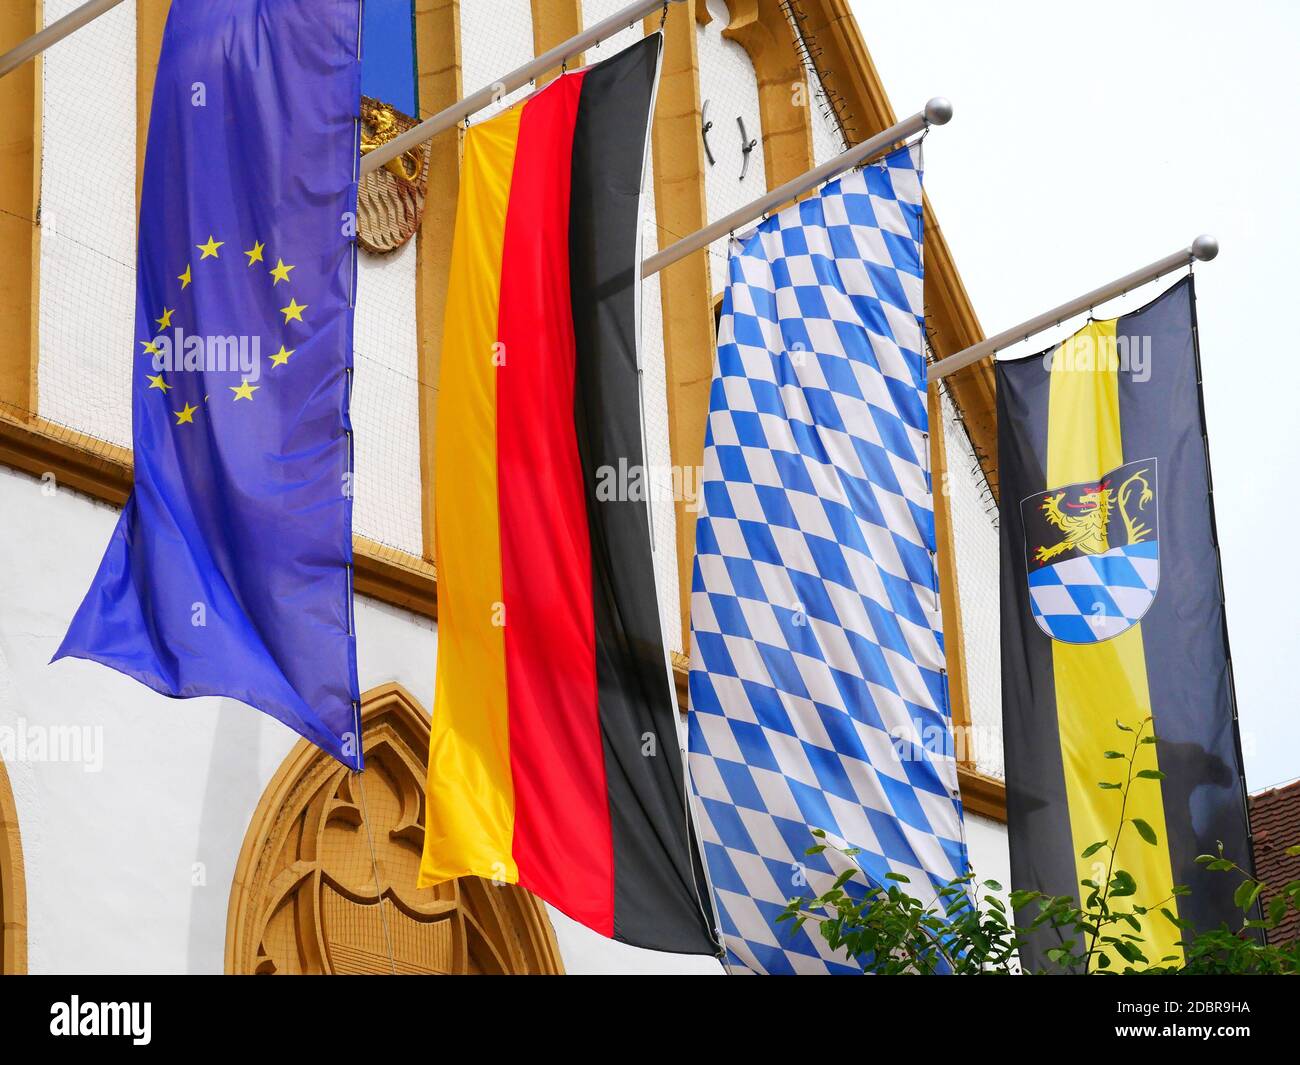 Amberg Bavaria Town Hall Flags Flags Flag Upper Palatinate East Bavaria Historic Old Town Historical Palatine Lion Coat of Arms Heraldic Display Place Marketplace Germany Europe Stock Photo